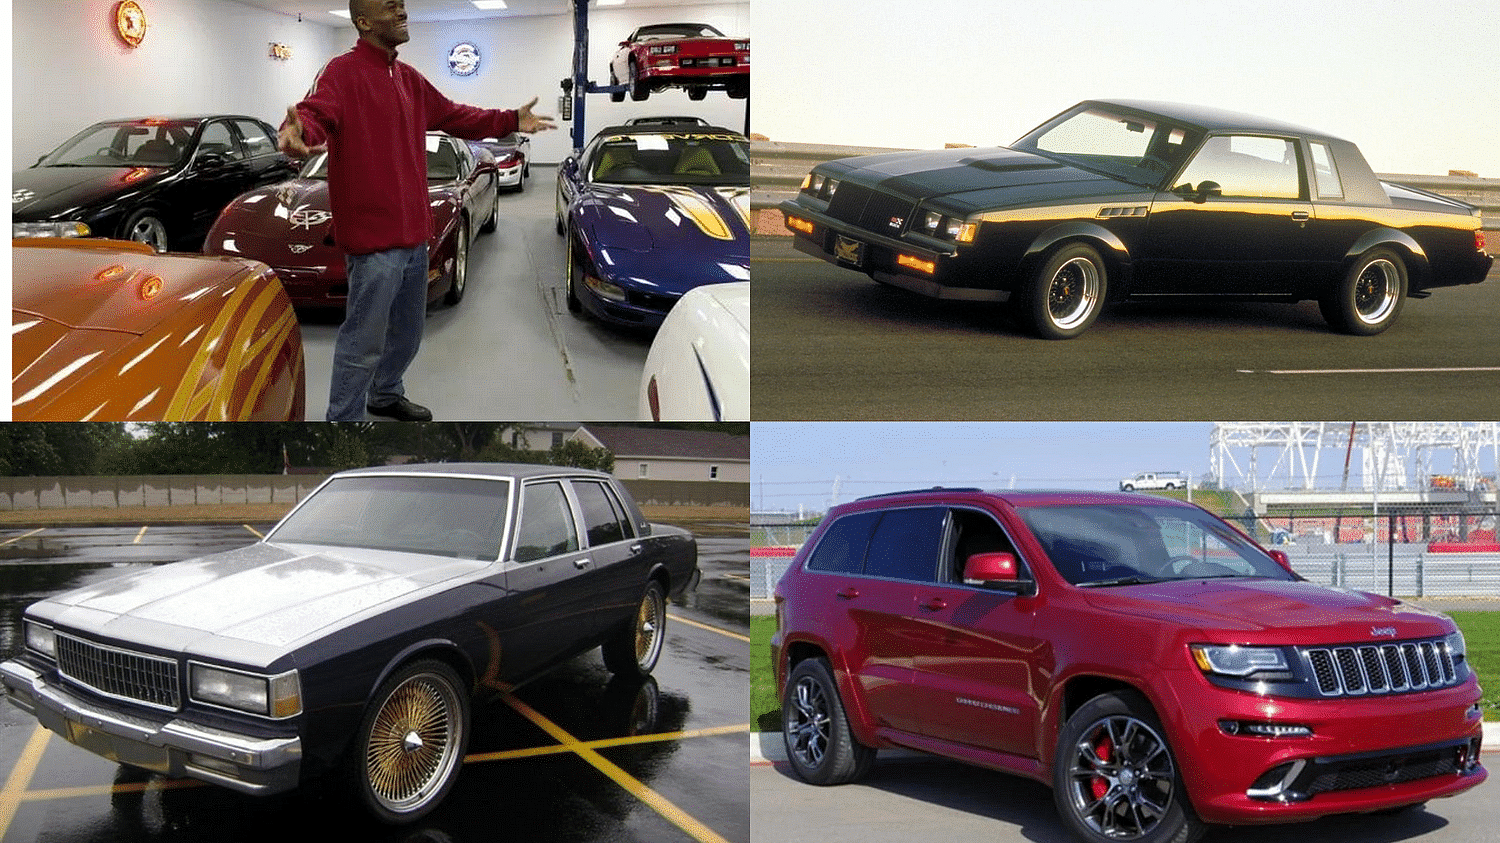 Marvin Harrison's car collection includes oldschool american muscle cars and the jeep grand cherokee SRT